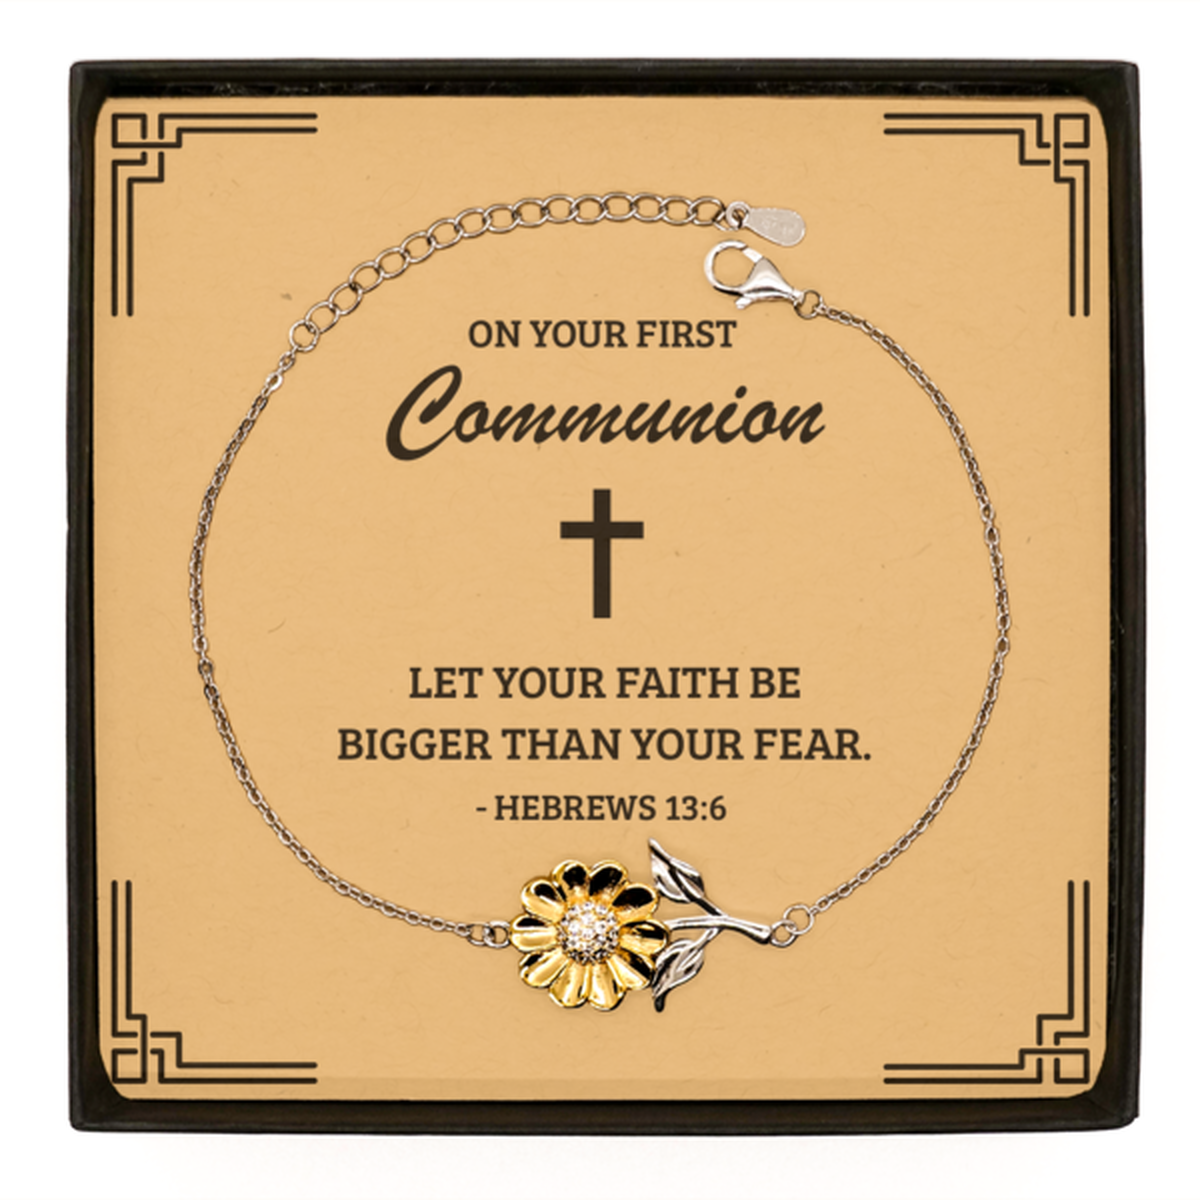 First Communion Gifts for Teenage Girls, Let your faith be bigger than your fear, .925 Sterling Silver Sunflower Bracelet with Bible Verse Message Card, Religious Catholic Bracelet for Daughter, Granddaughter